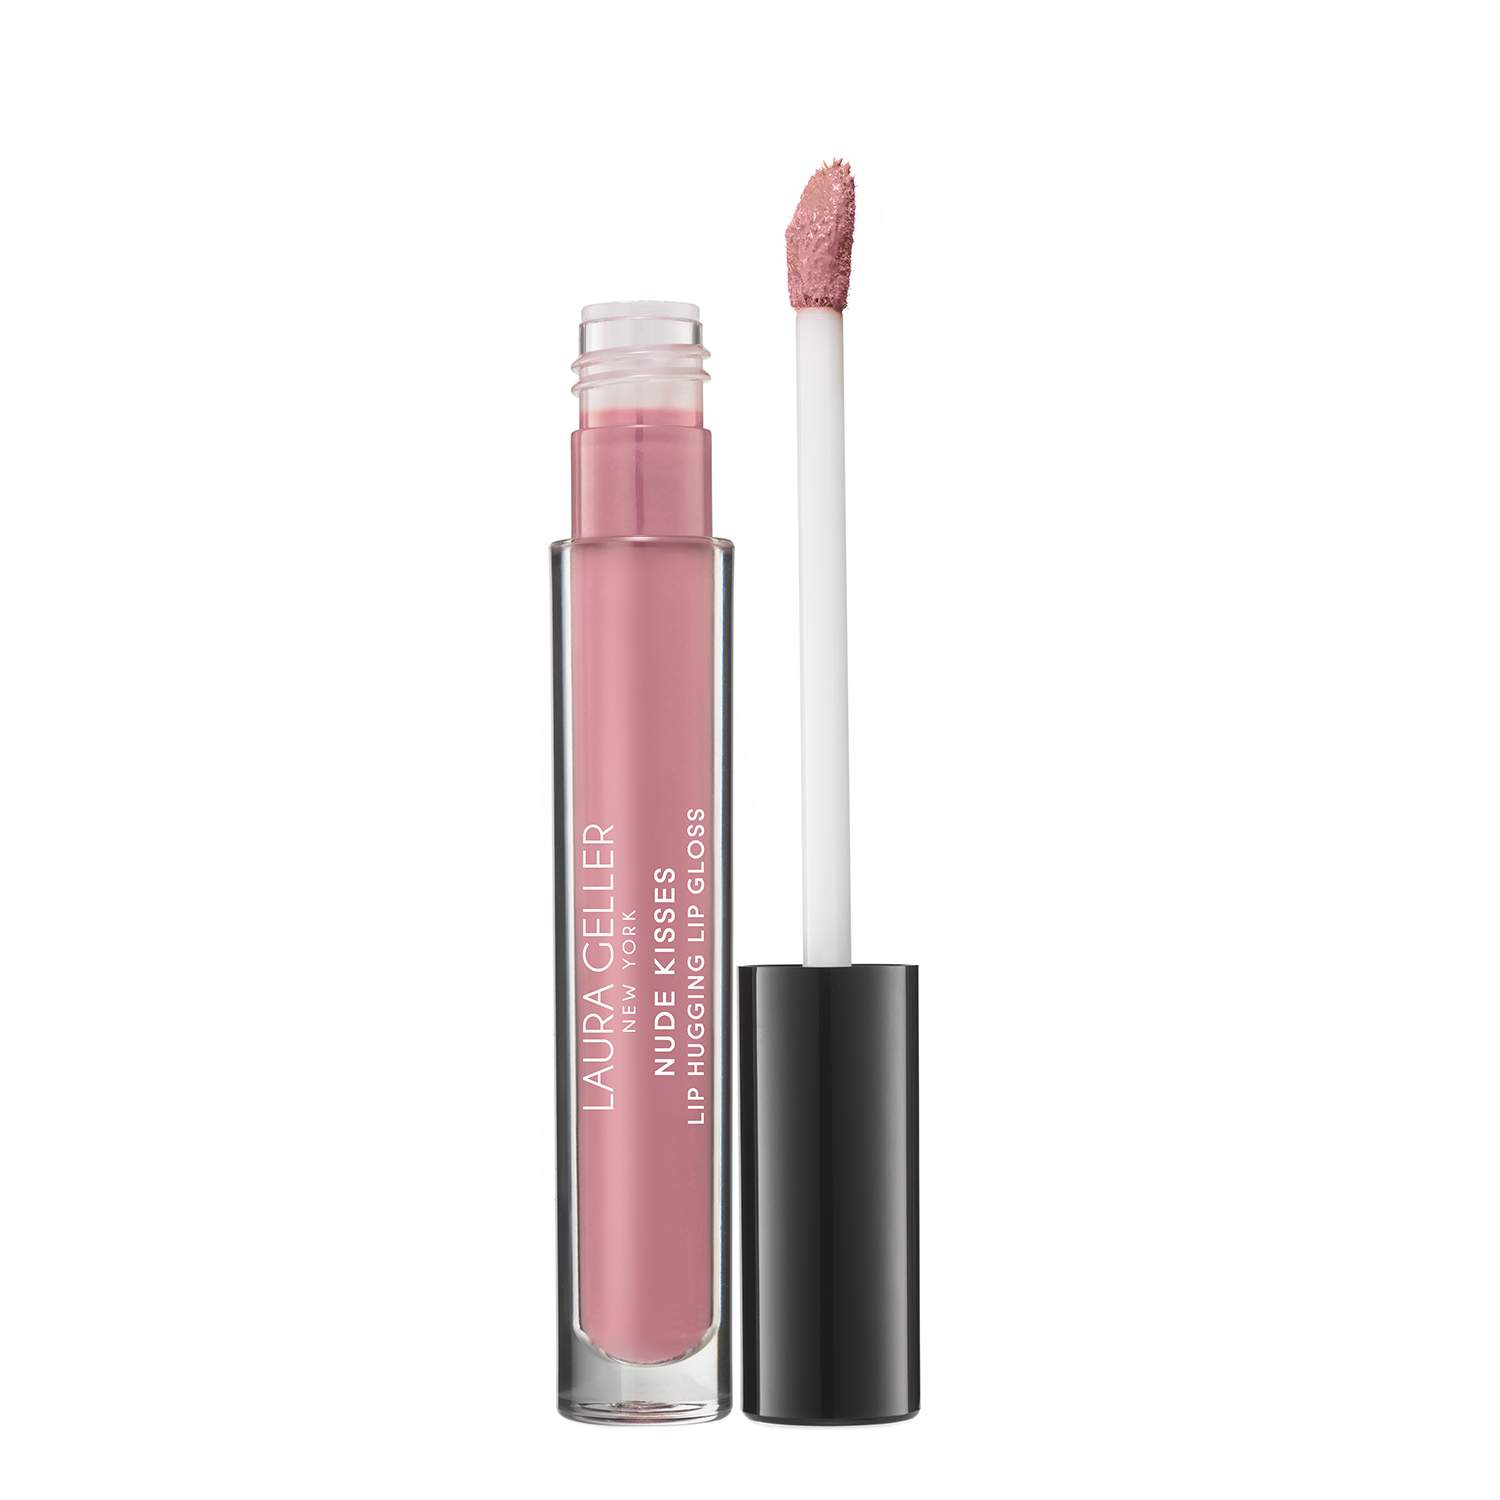 Laura Geller Nude Kisses Lip Hugging Lip Gloss - Barely There  1